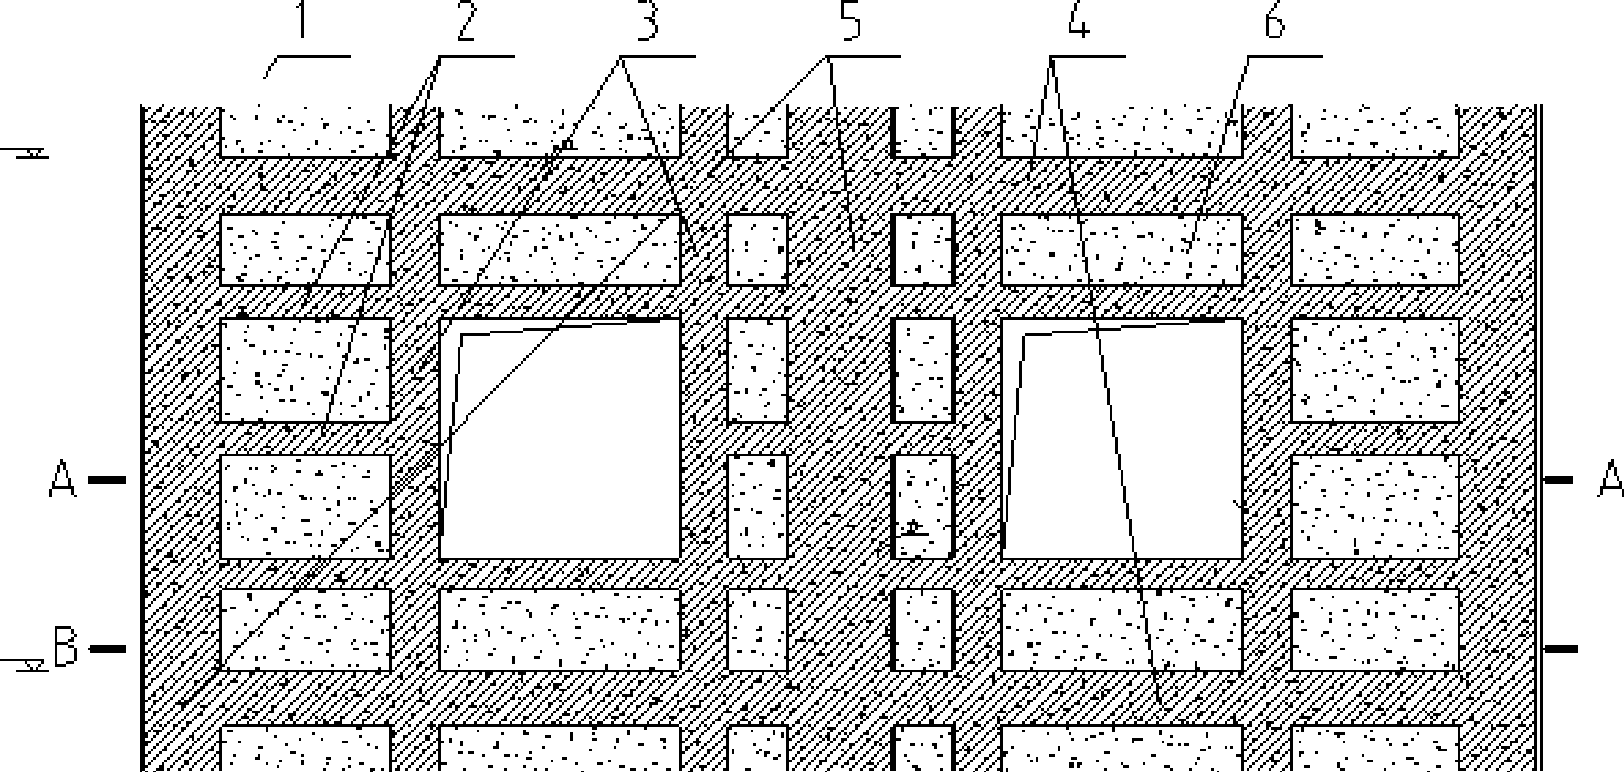 In-situ casting construction method of reinforced concrete structural system using phosphogypsum as wall material